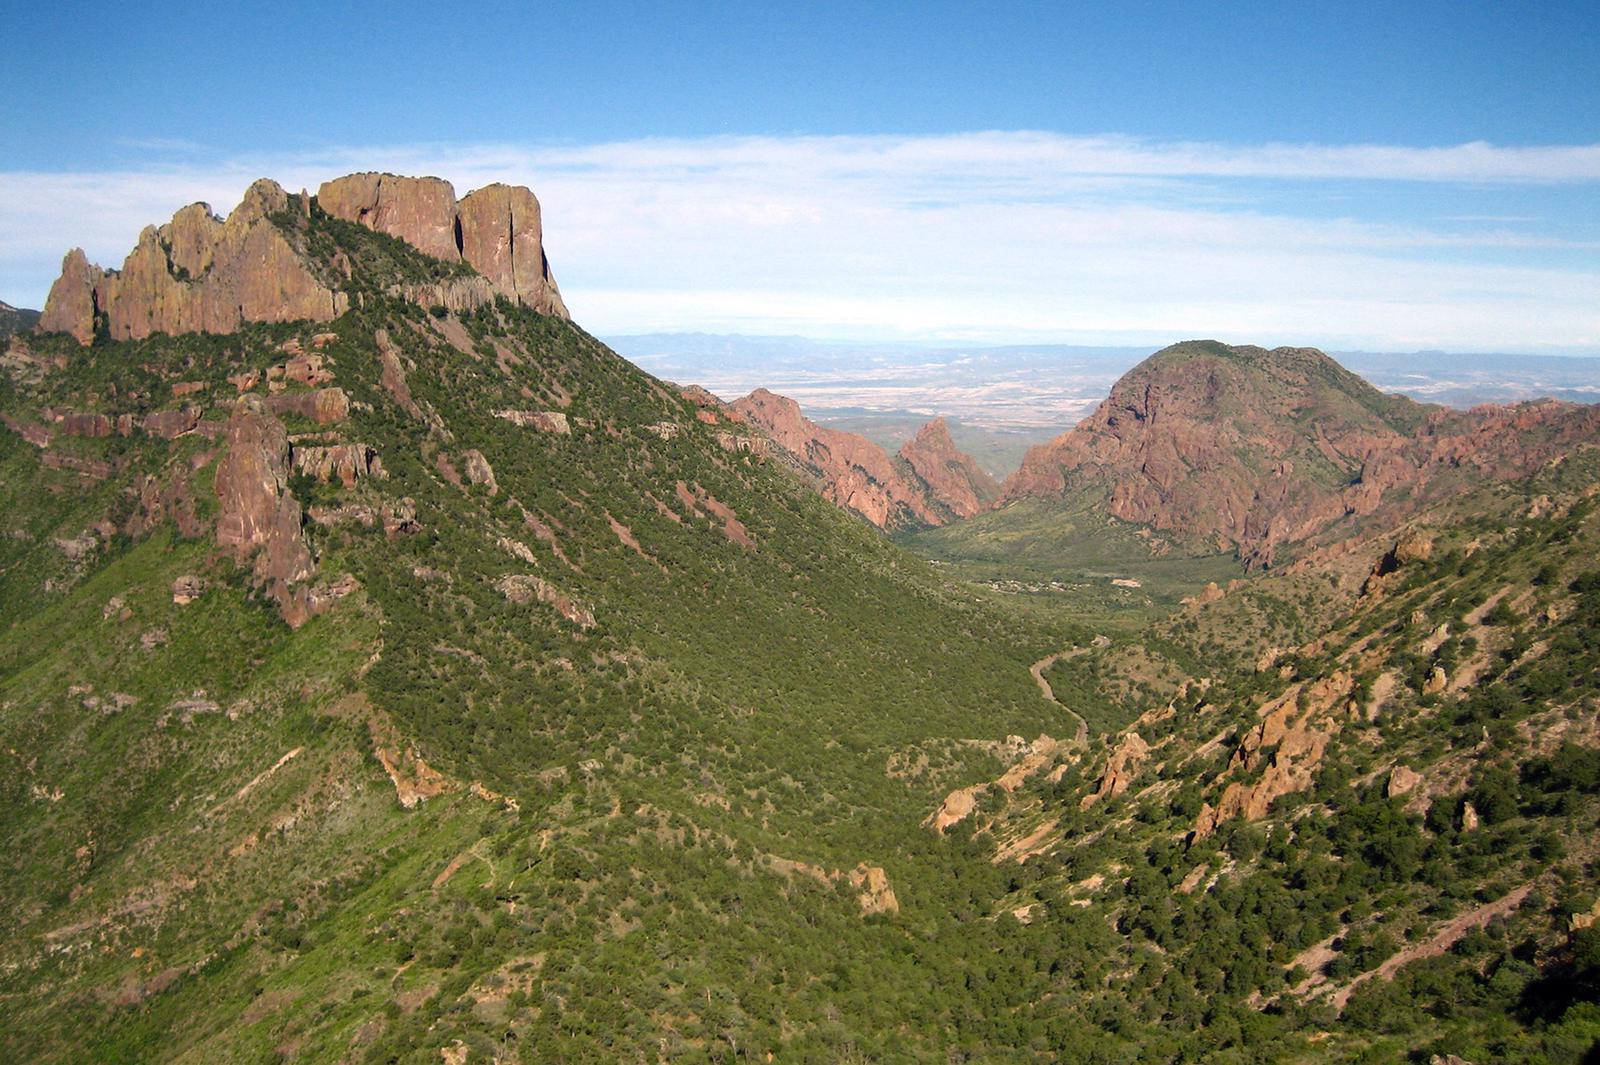 View of Chisos Basin from the Lost Mine trail. Green vegetation with red mountainsView of Chisos Basin from the Lost Mine trail